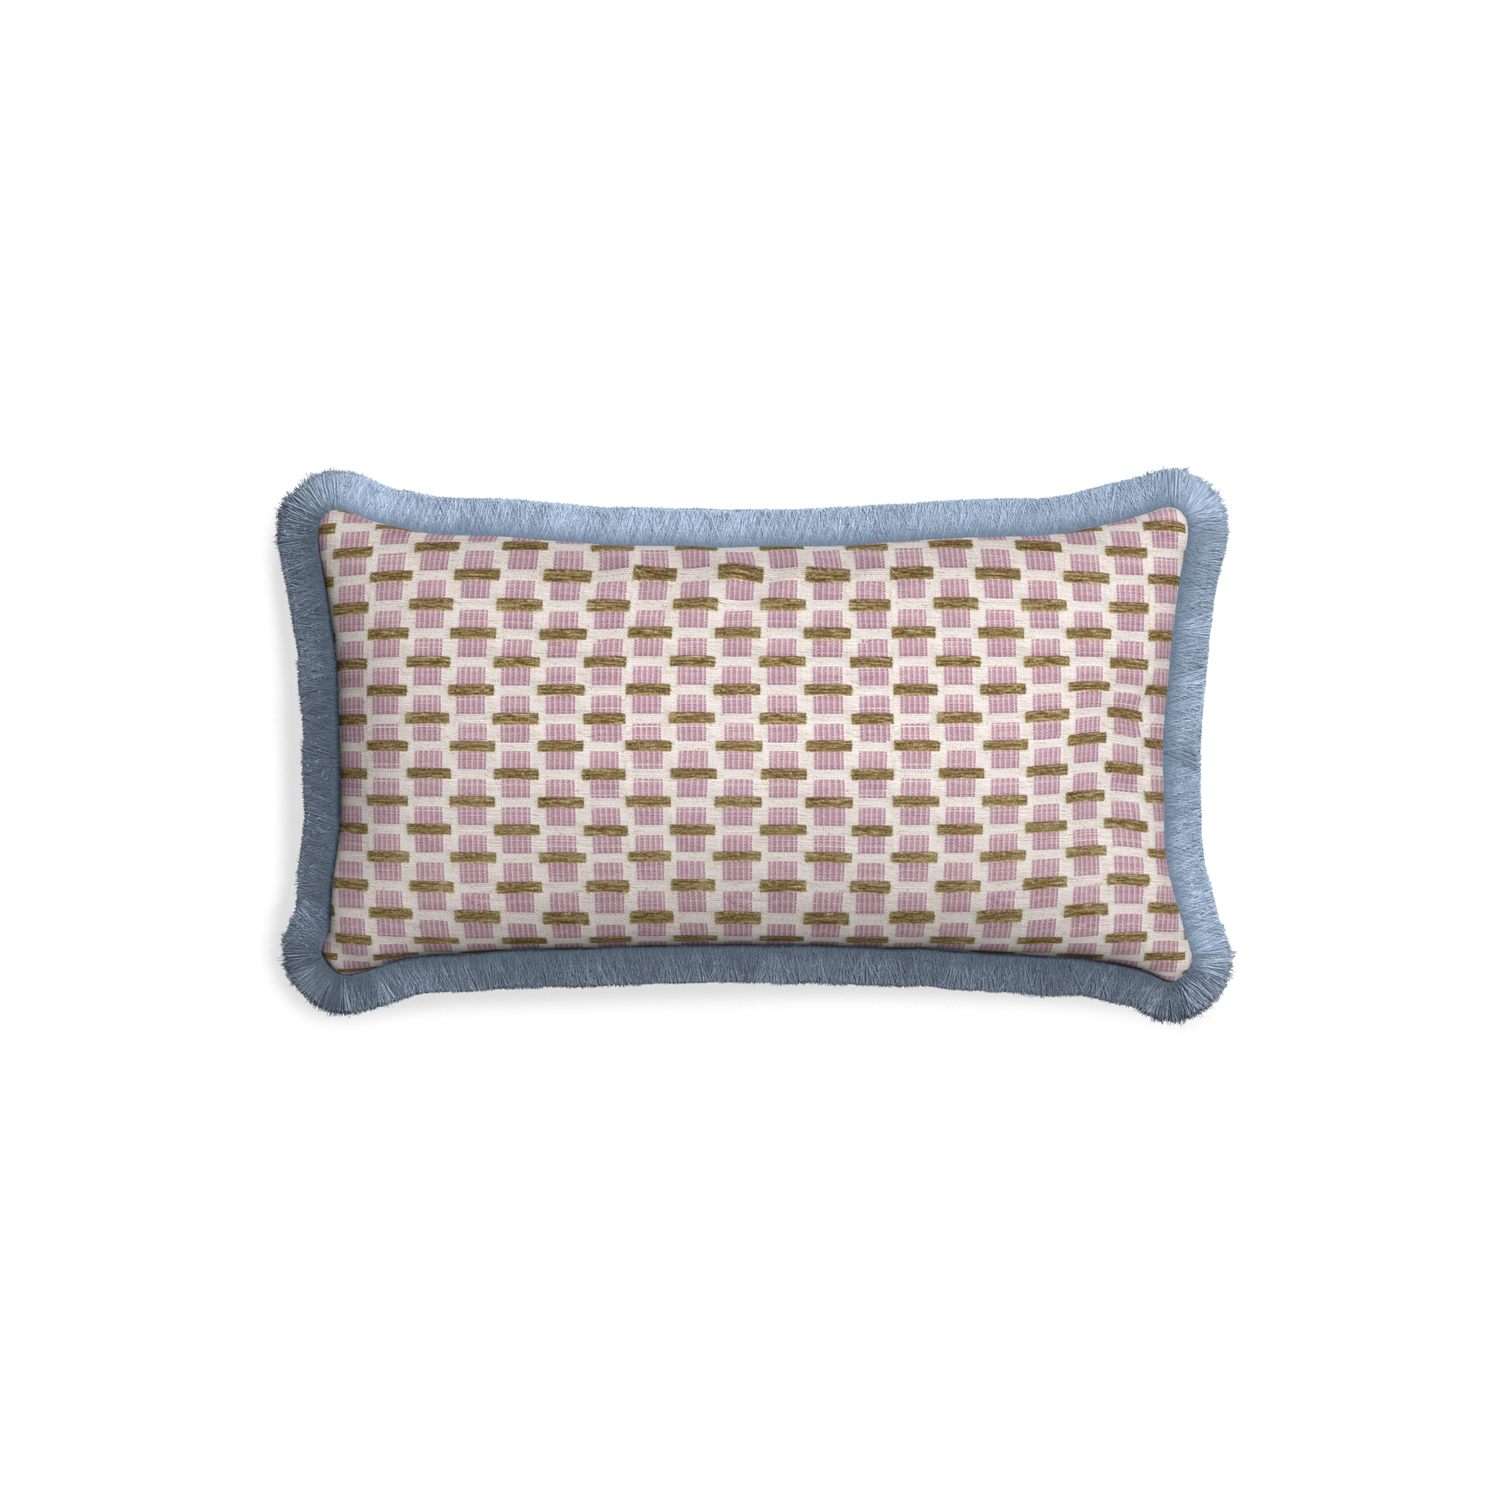 Petite-lumbar willow orchid custom pink geometric chenillepillow with sky fringe on white background